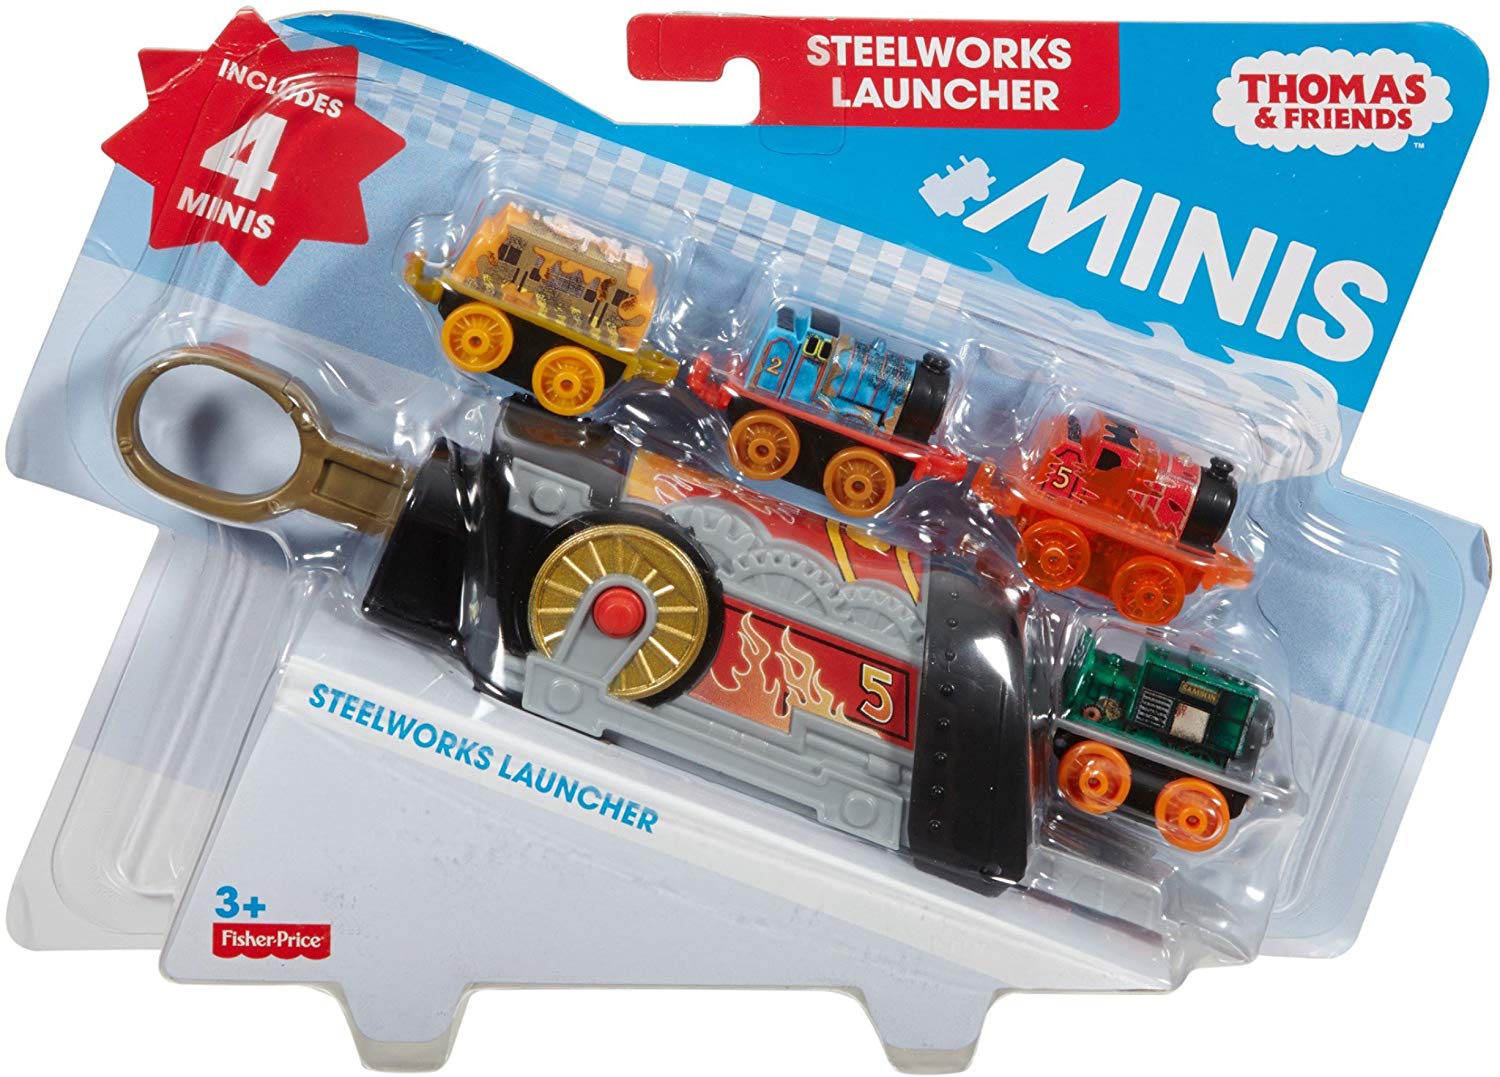 Image Steelworkslauncherbox Thomas And Friends Minis Wiki